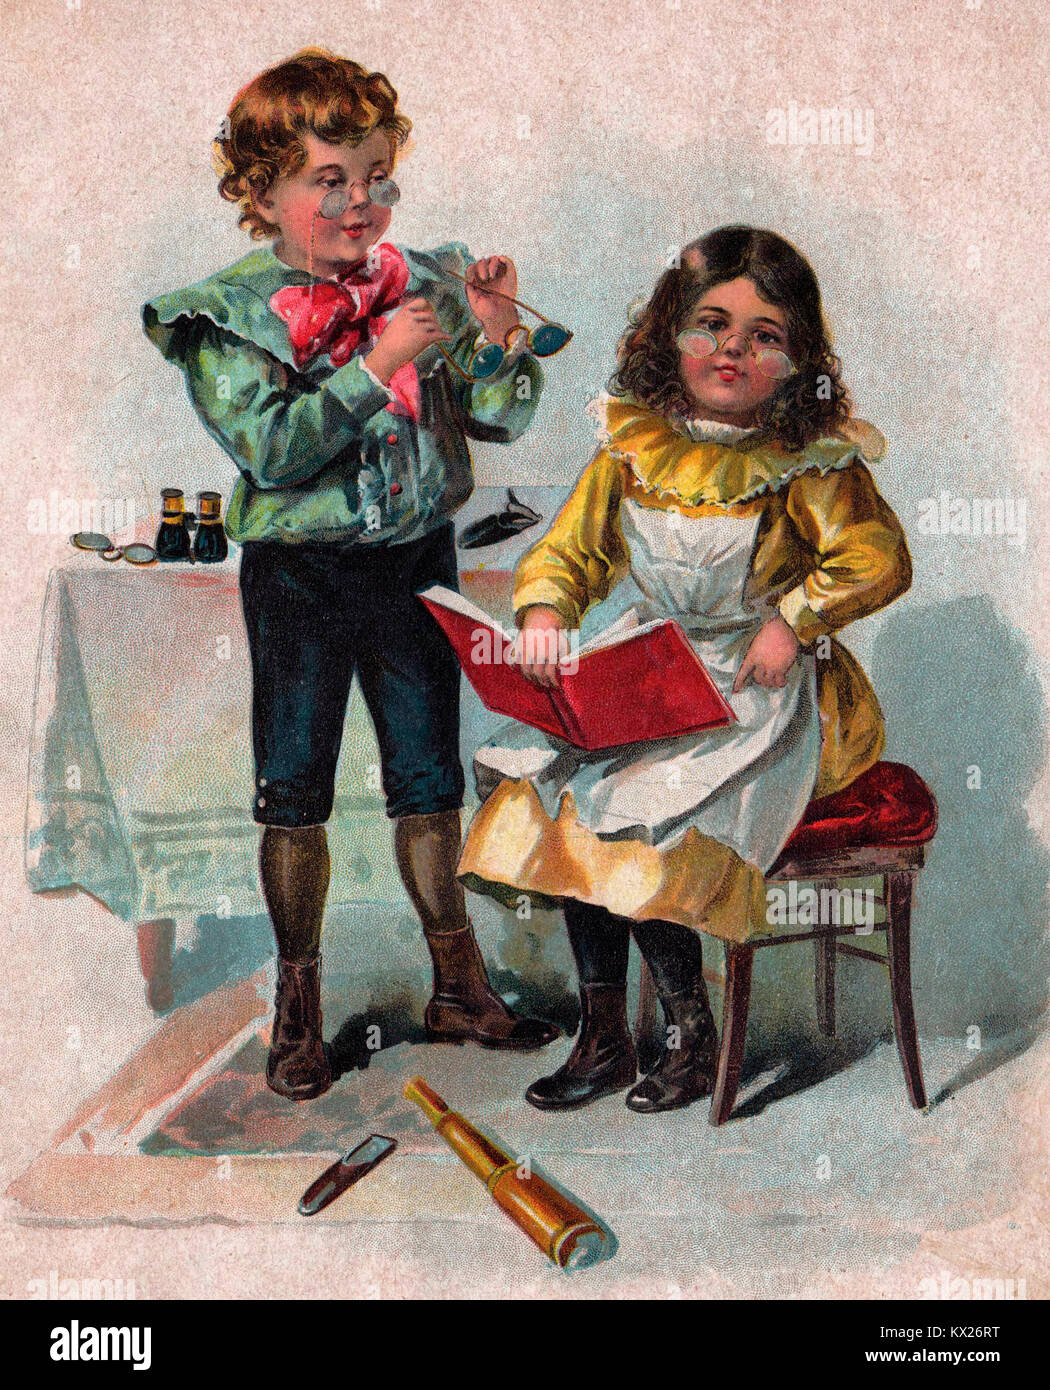 The Optician - Victorian image of Little Boy and Girl playing Optician and patient Stock Photo